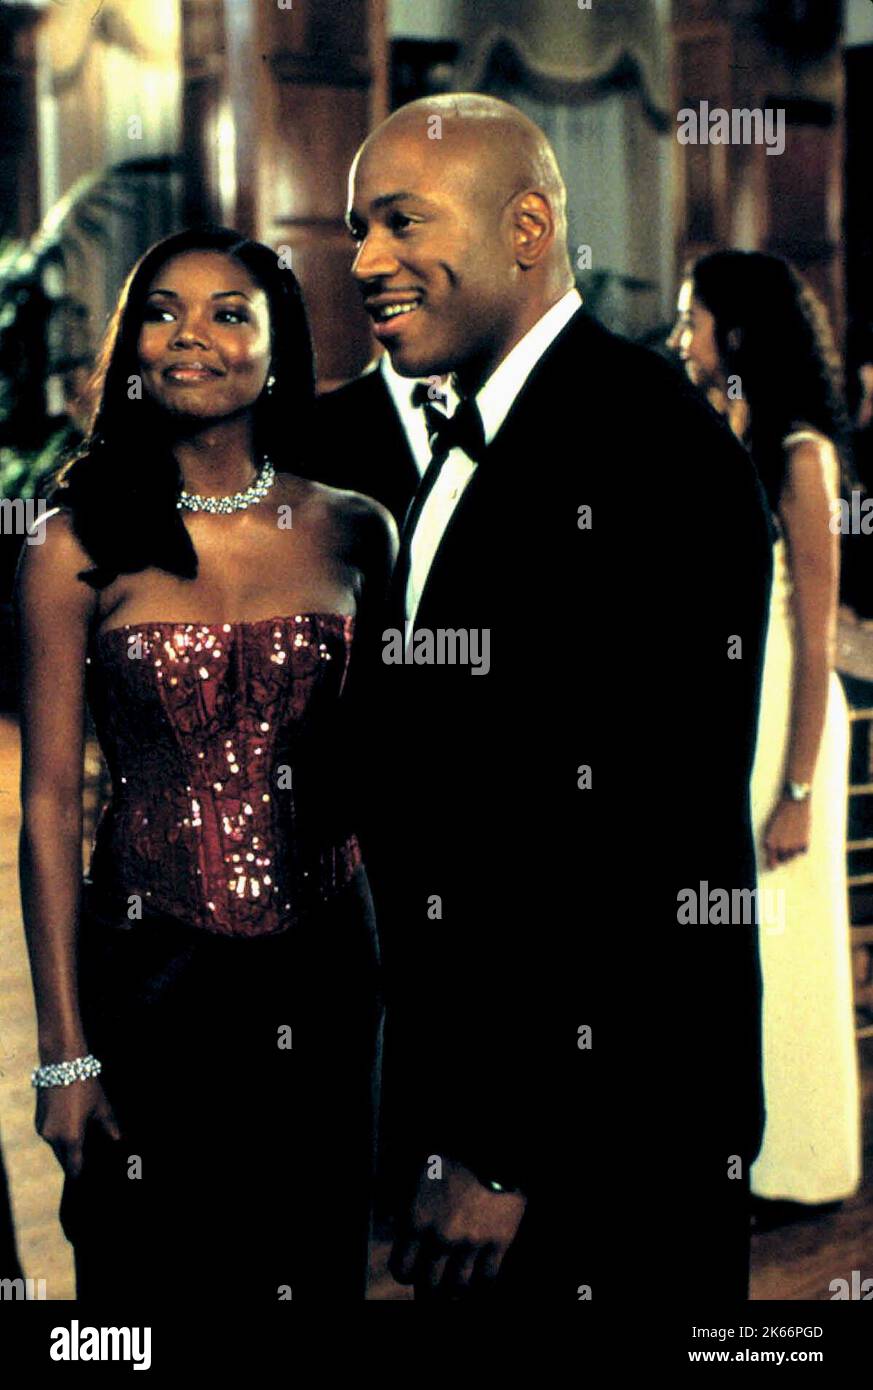 GABRIELLE UNION, LL COOL J, DELIVER US FROM EVA, 2003 Stock Photo